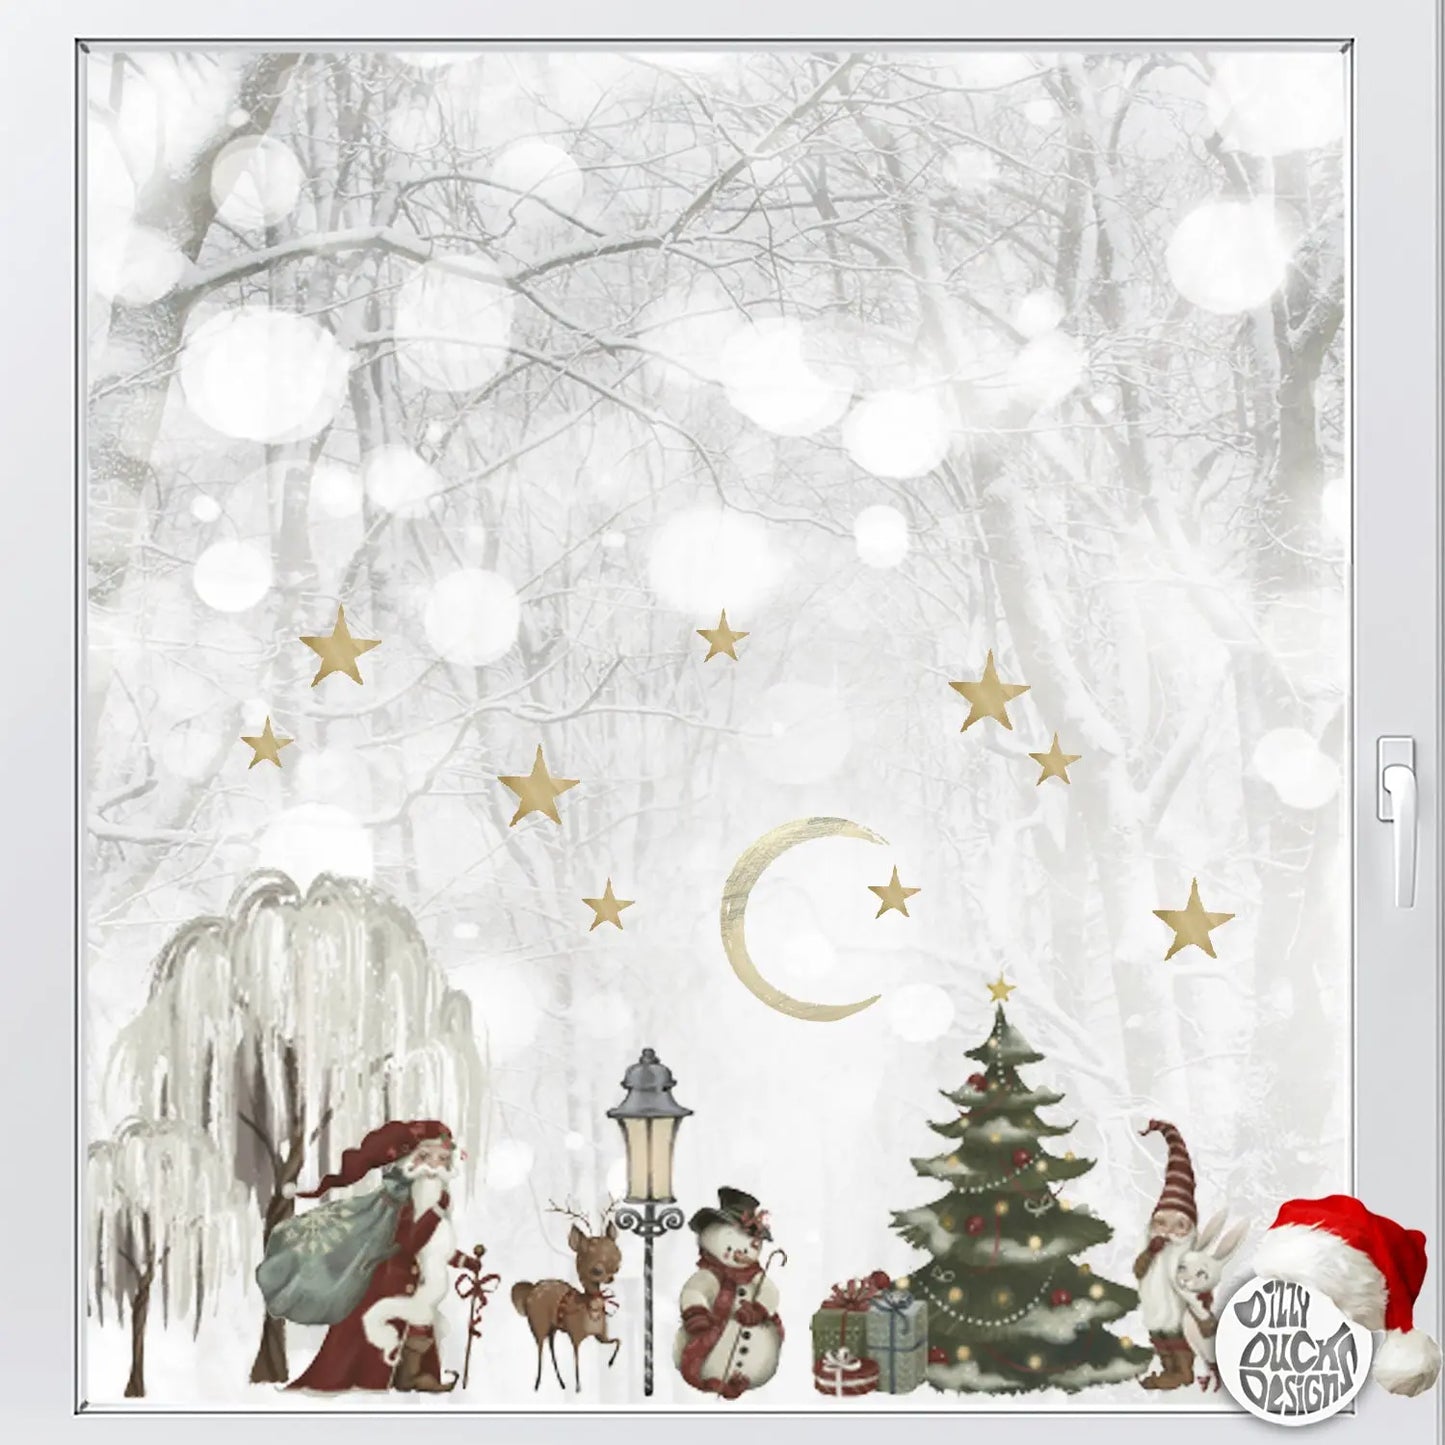 Decal Father Christmas Winter Scene Window Decal Set Dizzy Duck Designs